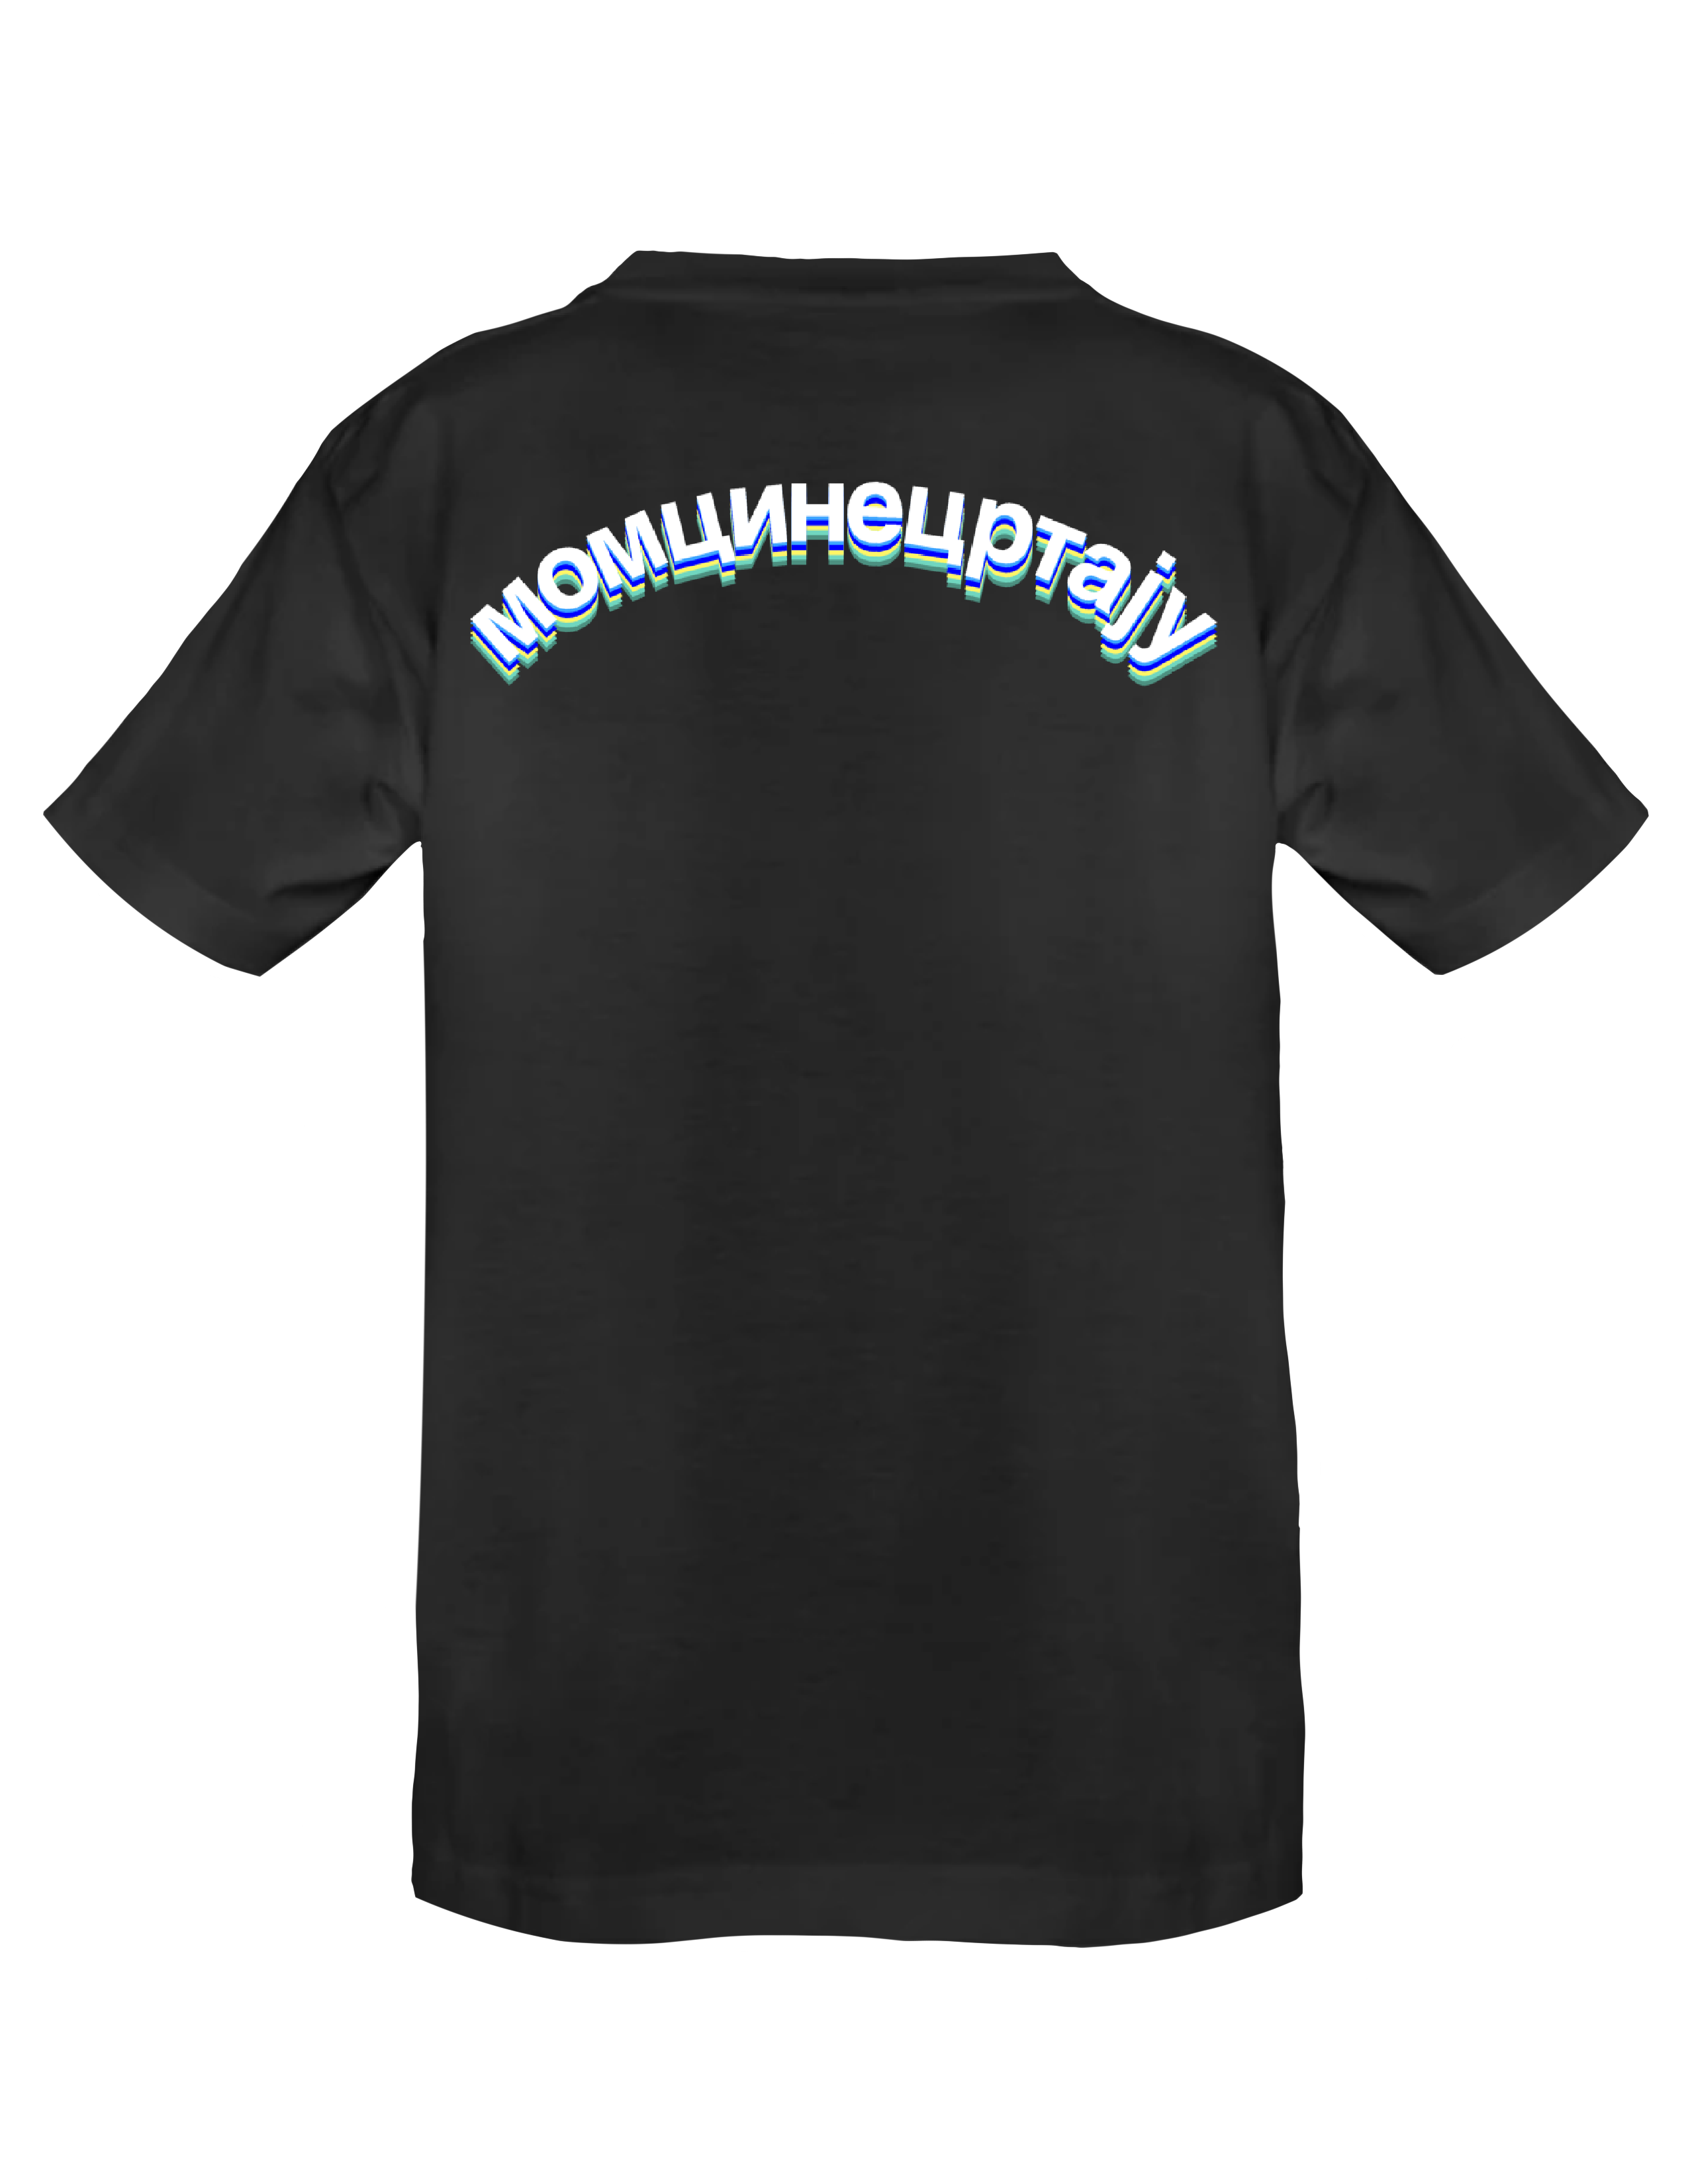 AFFIRMATION - RECONNECTING WITH THE UNIVERSE T-Shirt by BOYSDONTDRAW